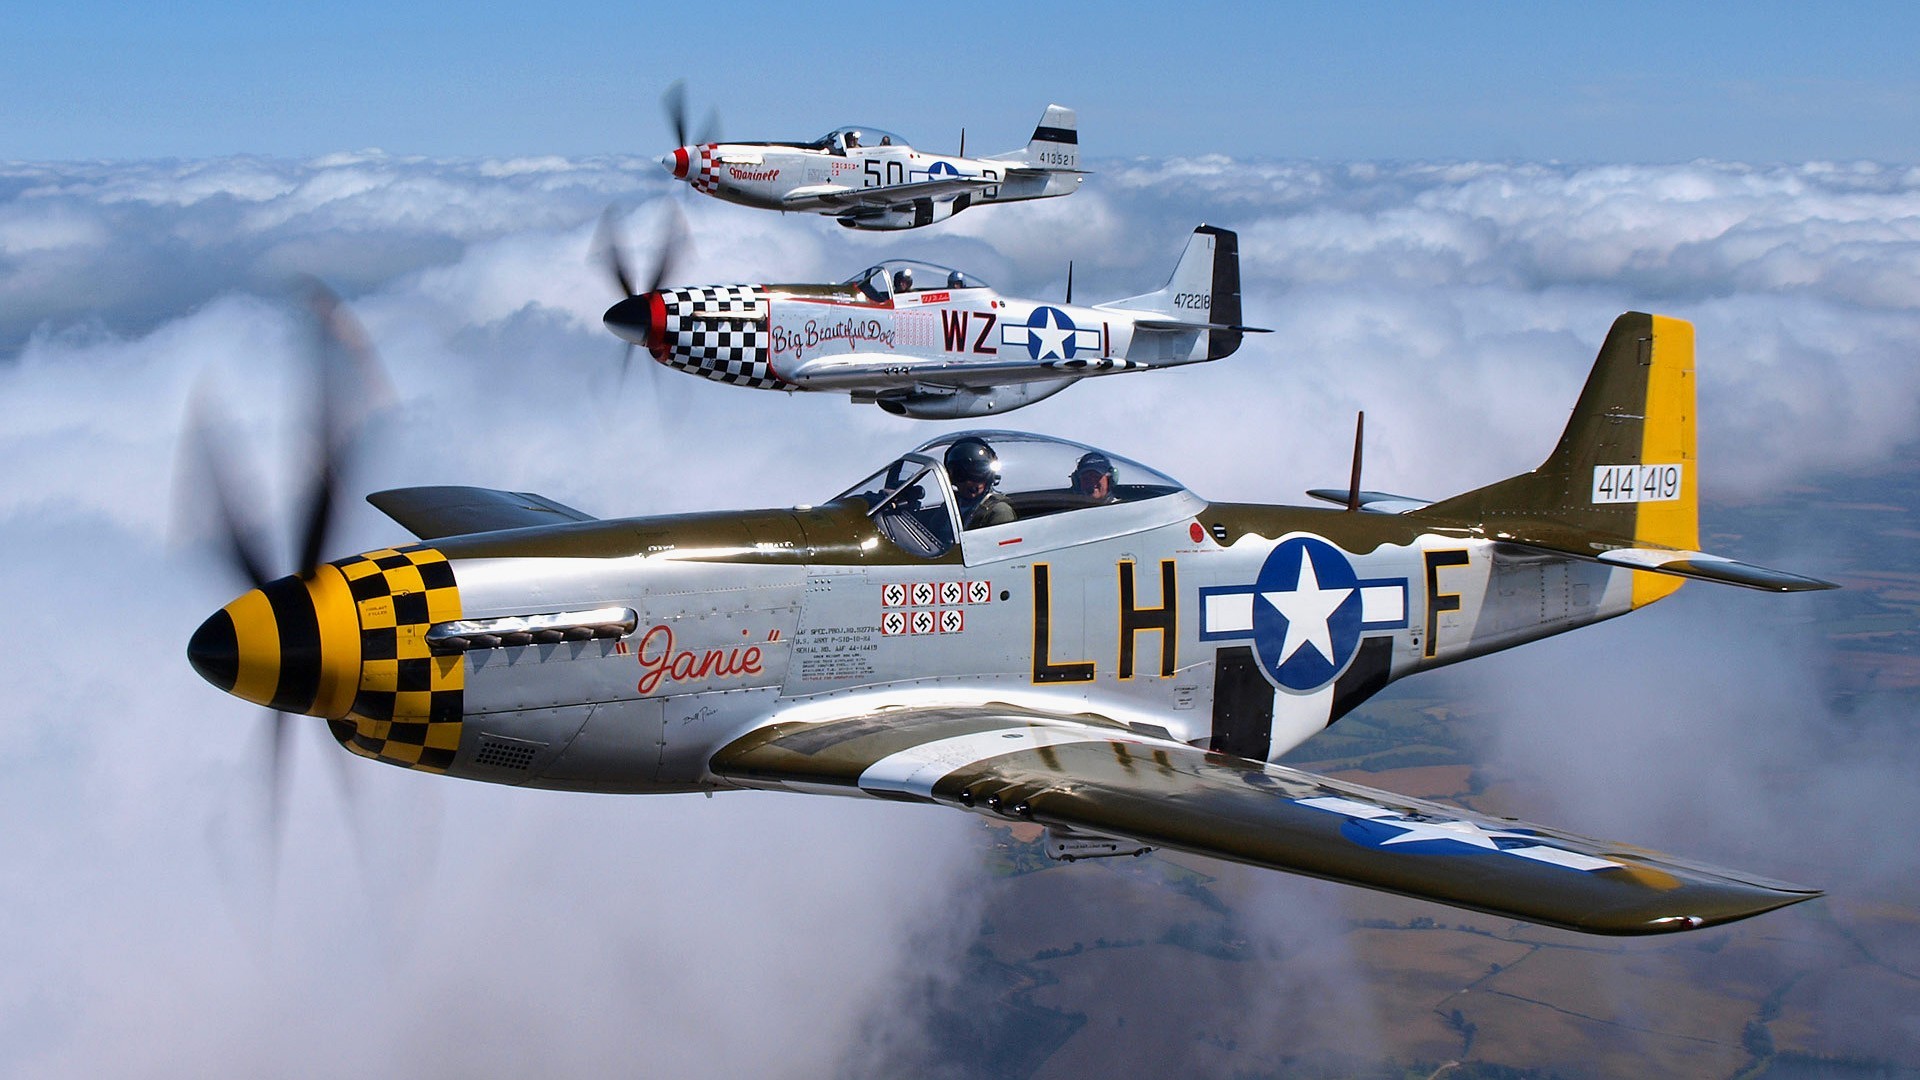 High Quality P 51 Mustang Wallpaper | Full HD Pictures